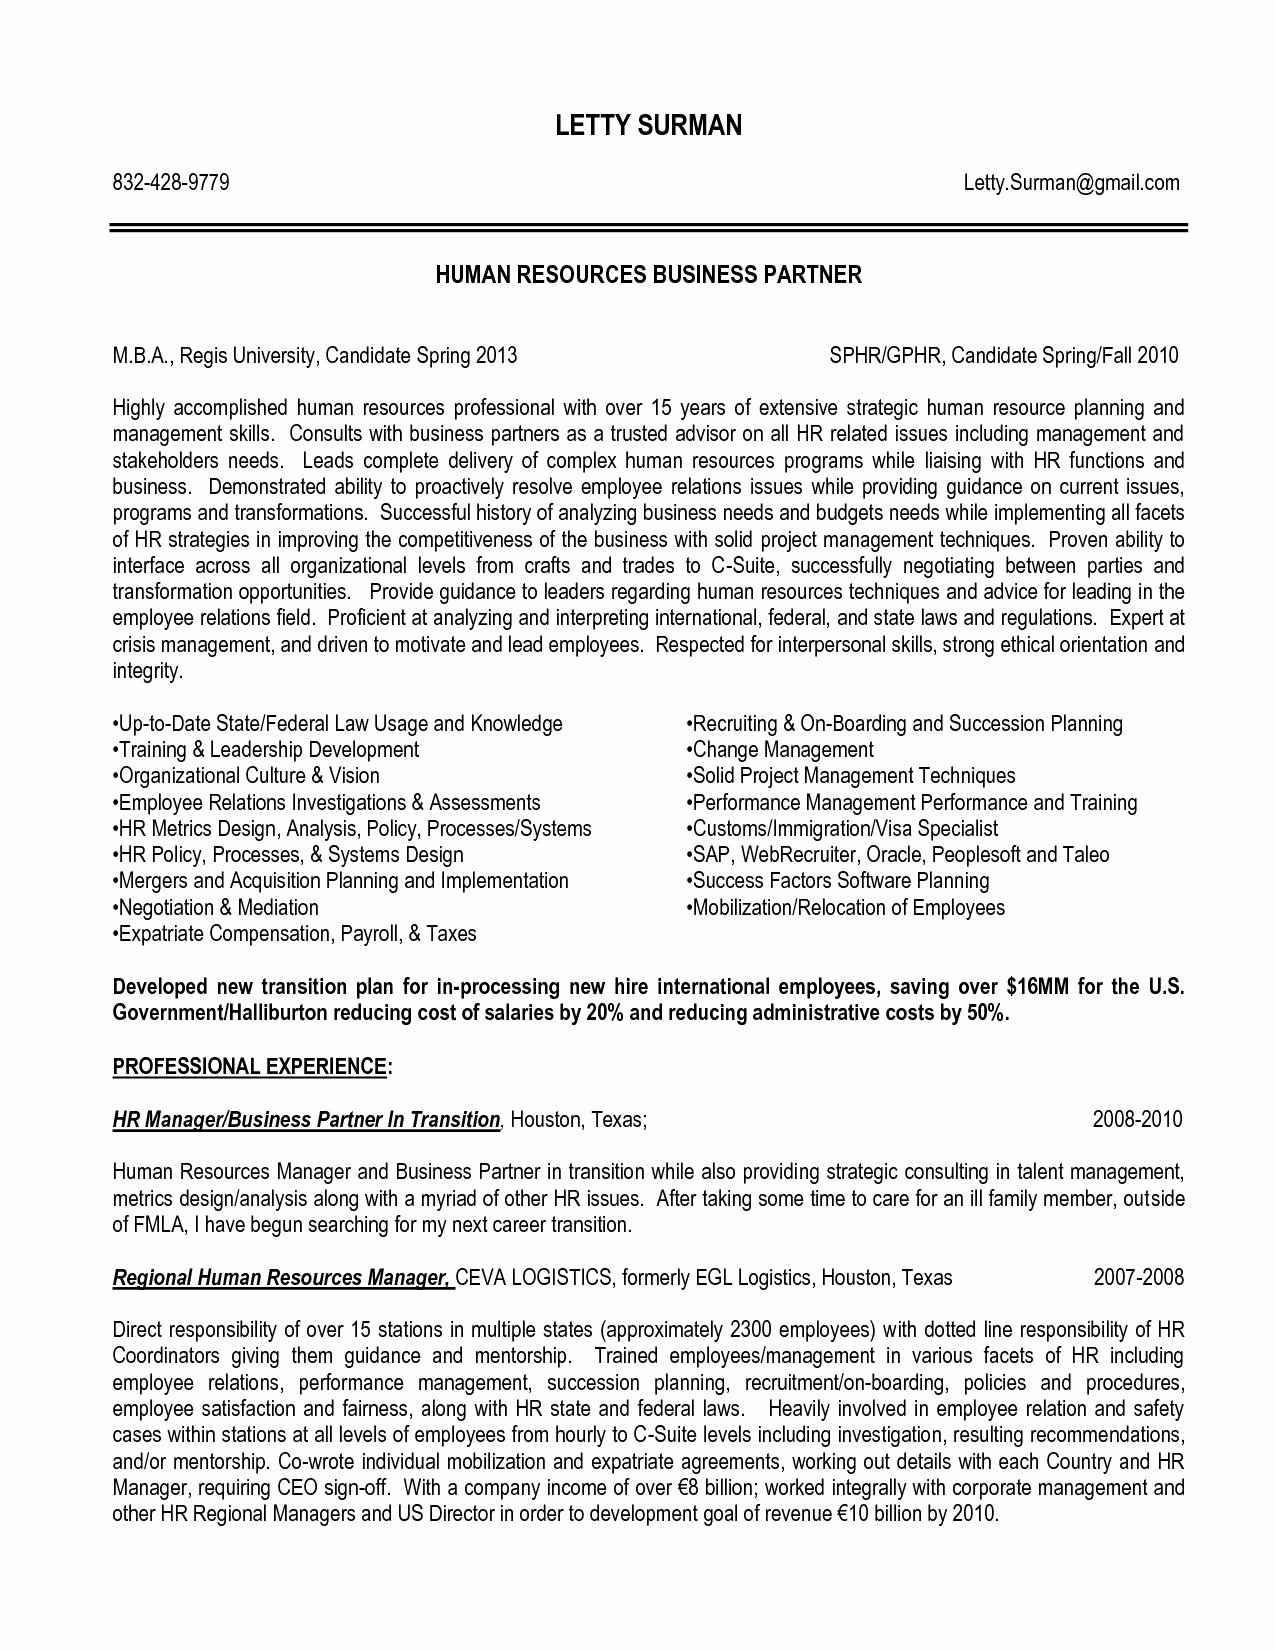 Resume Templates for Older Workers Resume Templates for